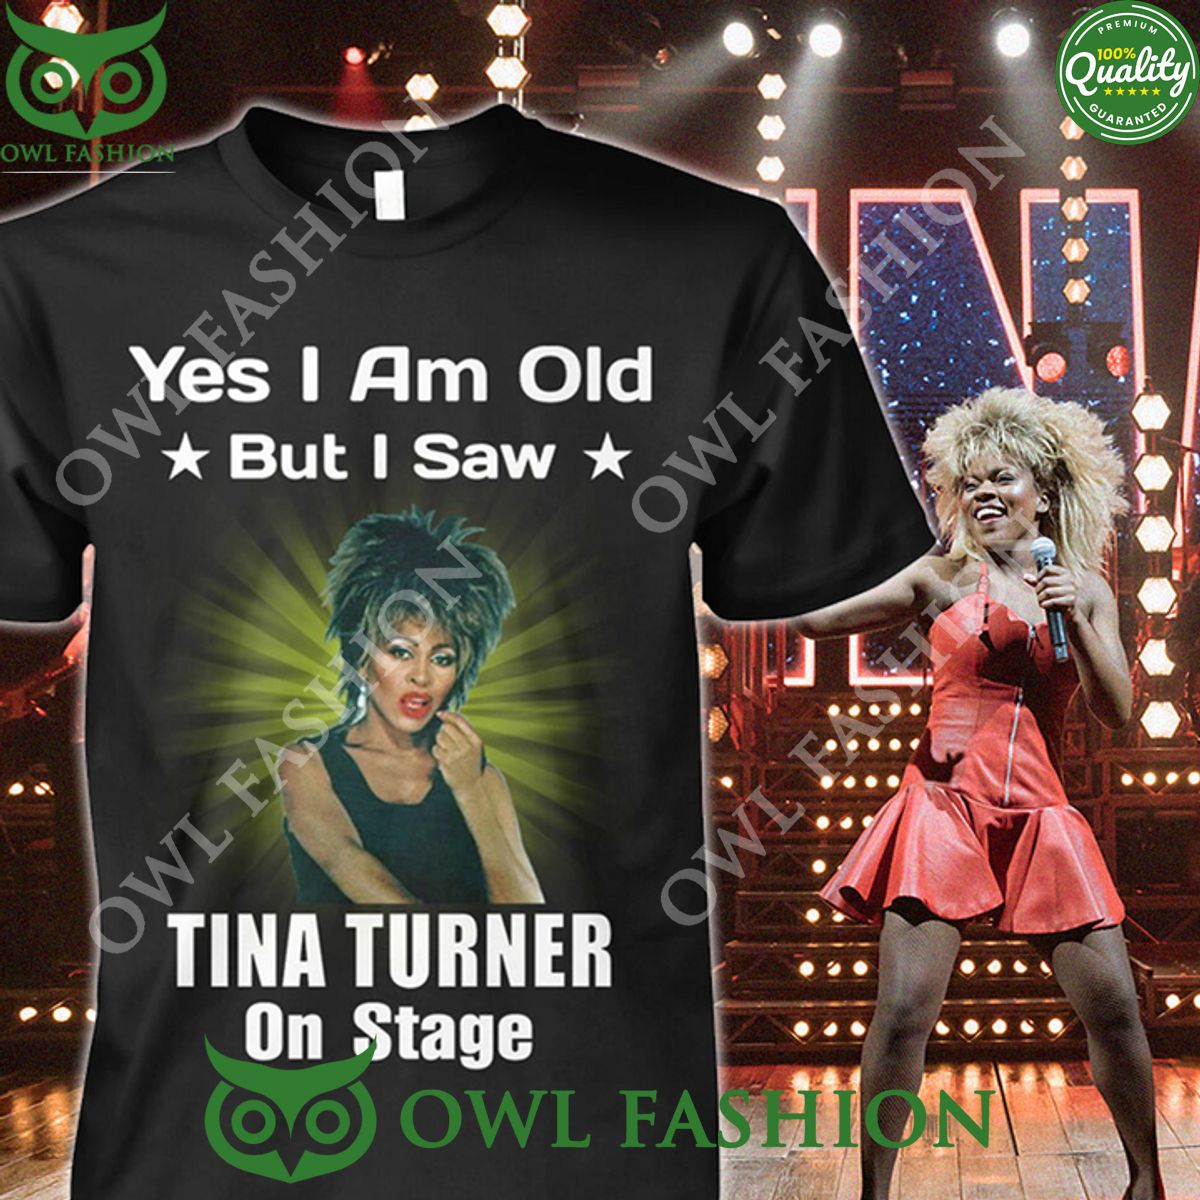 yes i am old but i saw tina turner on stage t shirt 1 Cw0hB.jpg